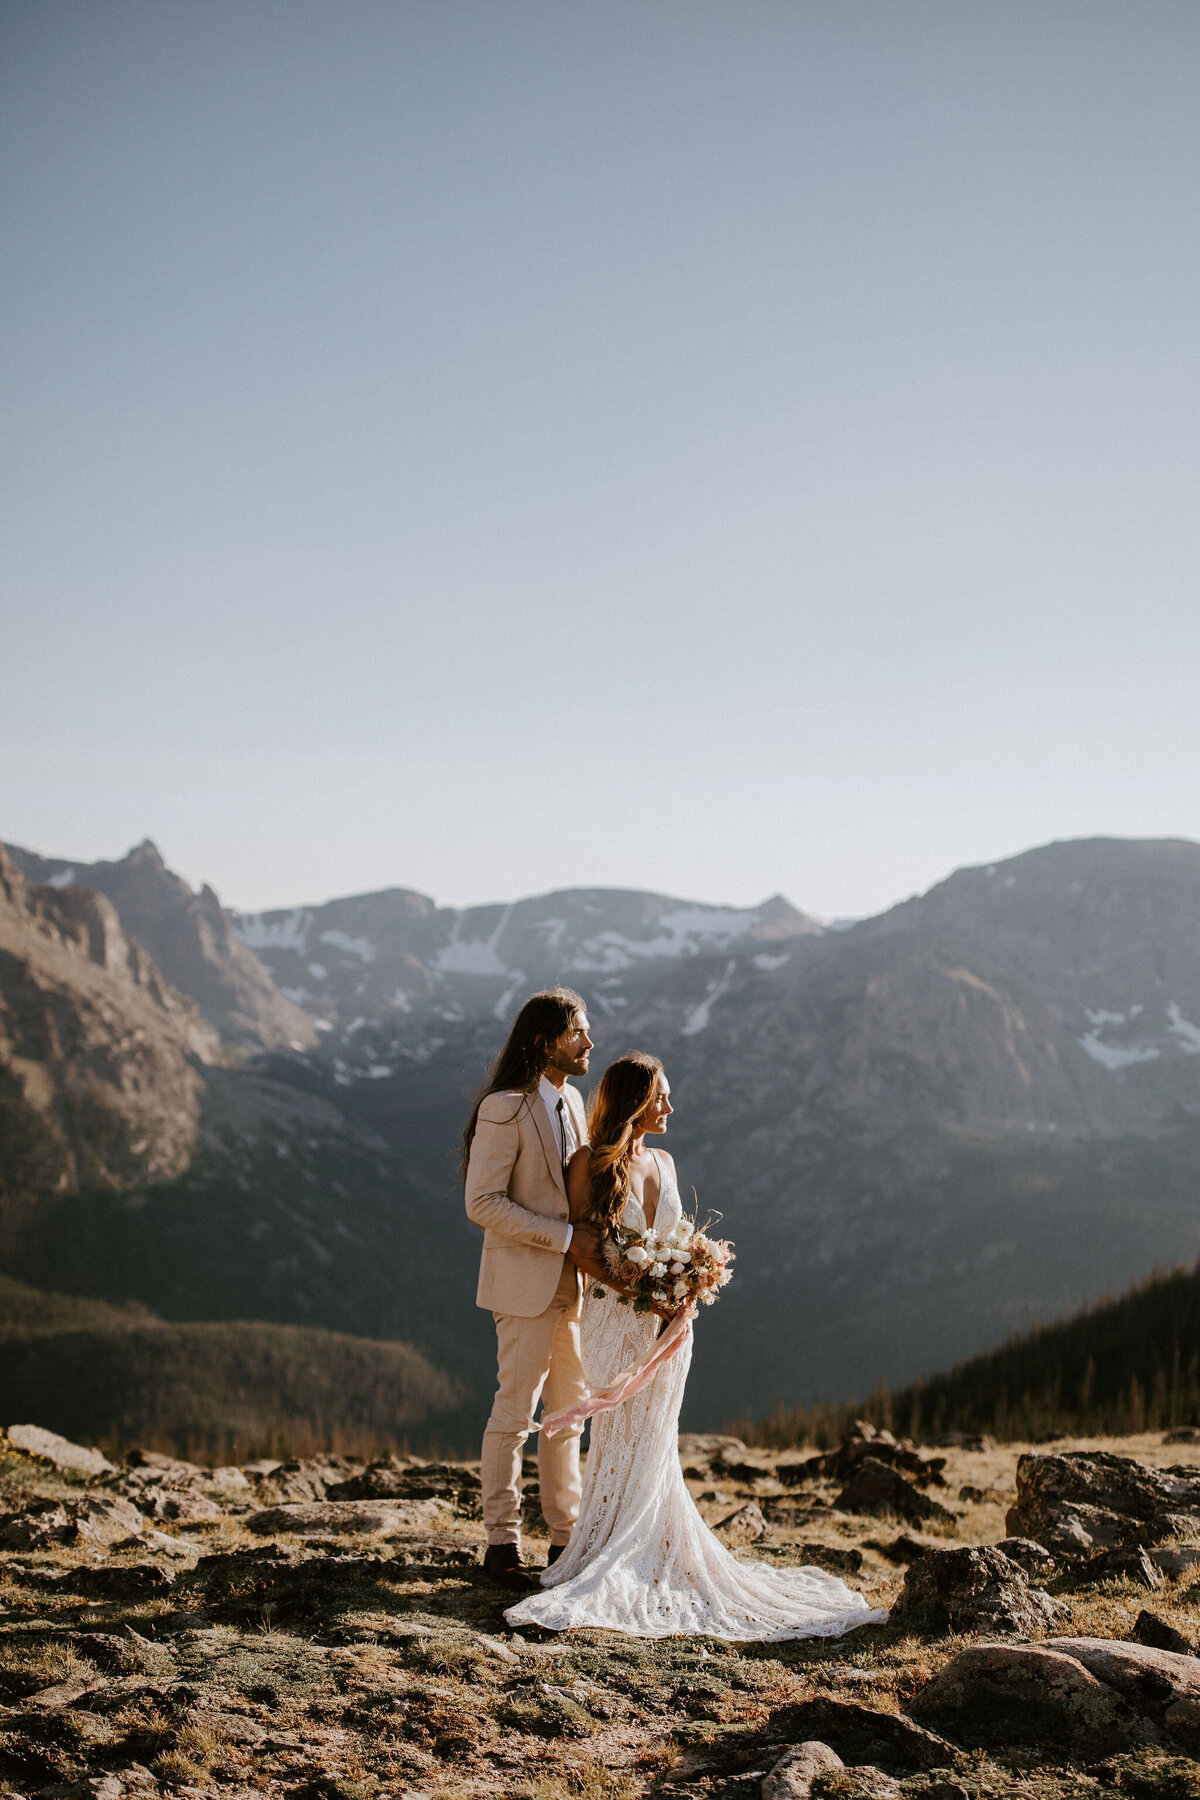 Side profile of standing Bride and groom wearing an ivory suit and white wedding gown with mountains in the background.